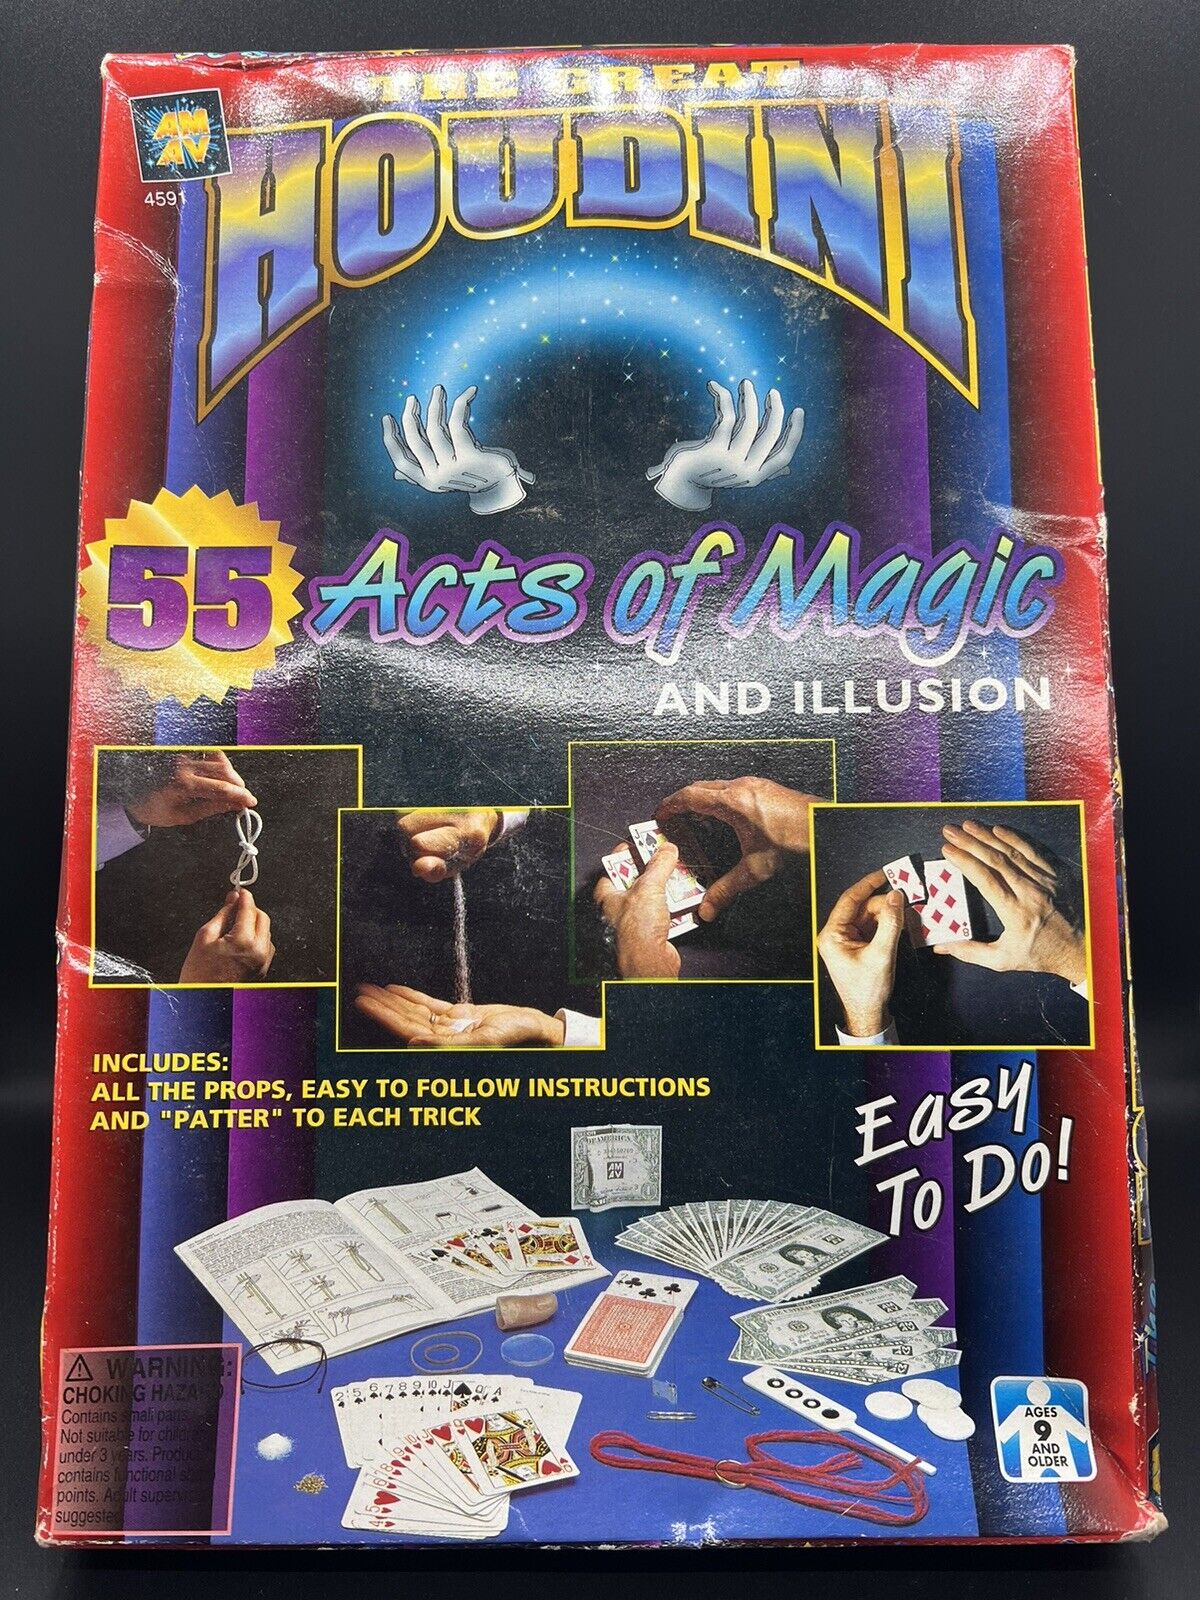 The great Houdini 55 acts of magic and illusion tricks Vintage..